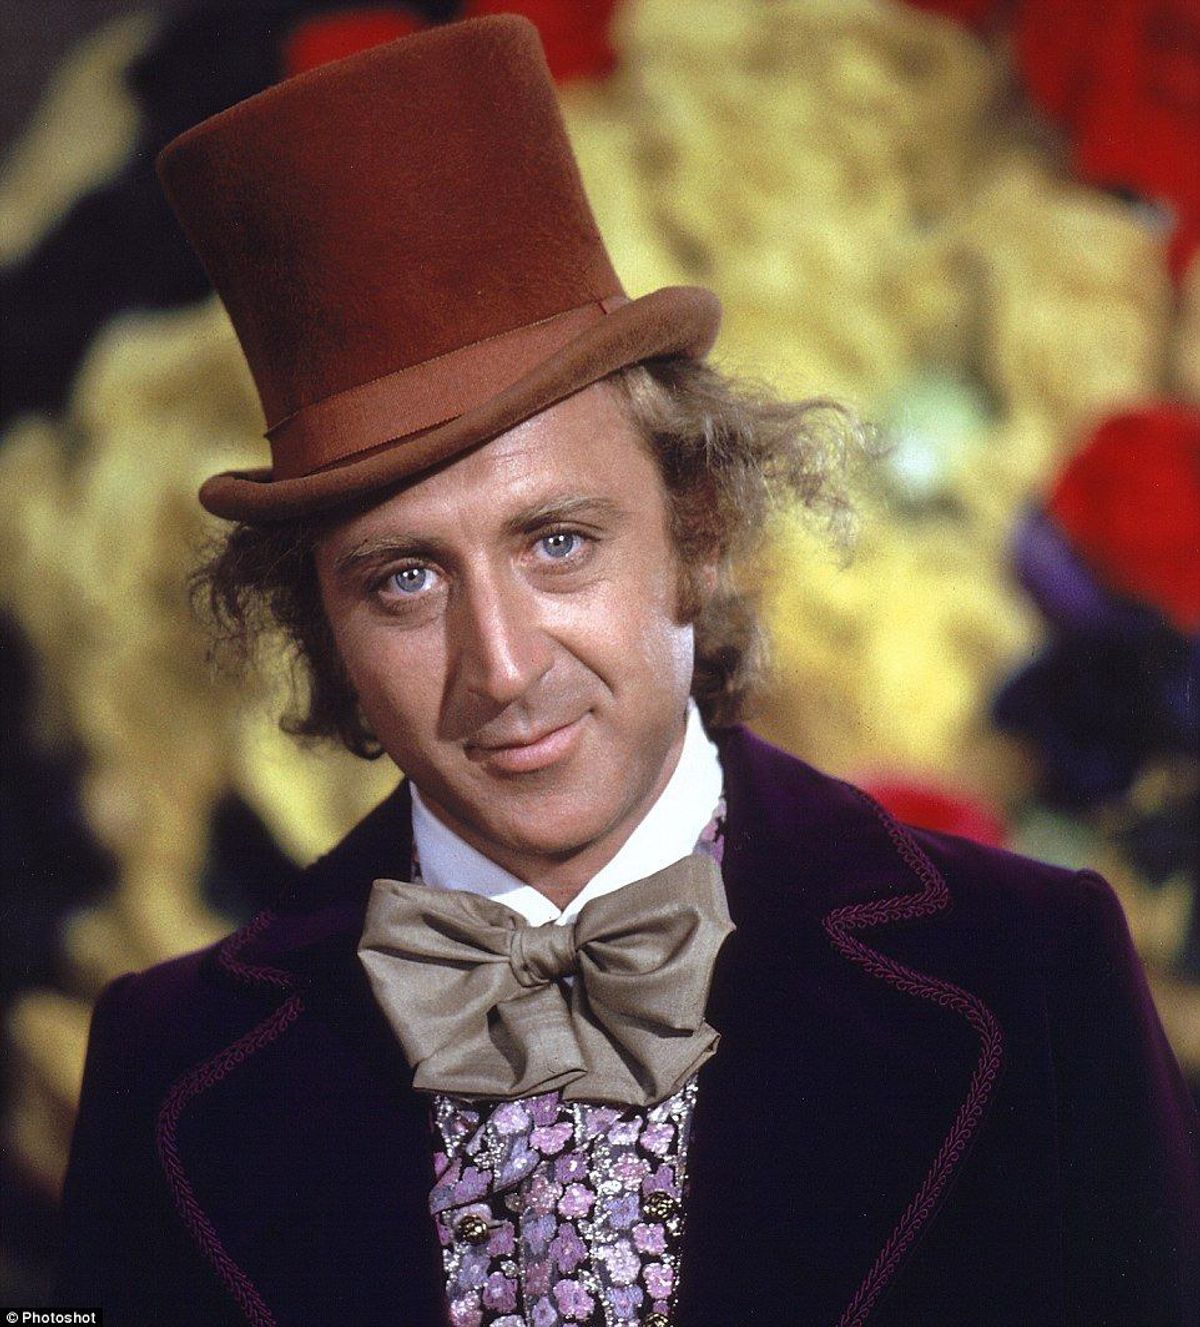 Gene Wilder: An Ode To One Of The Funniest Minds On The Planet